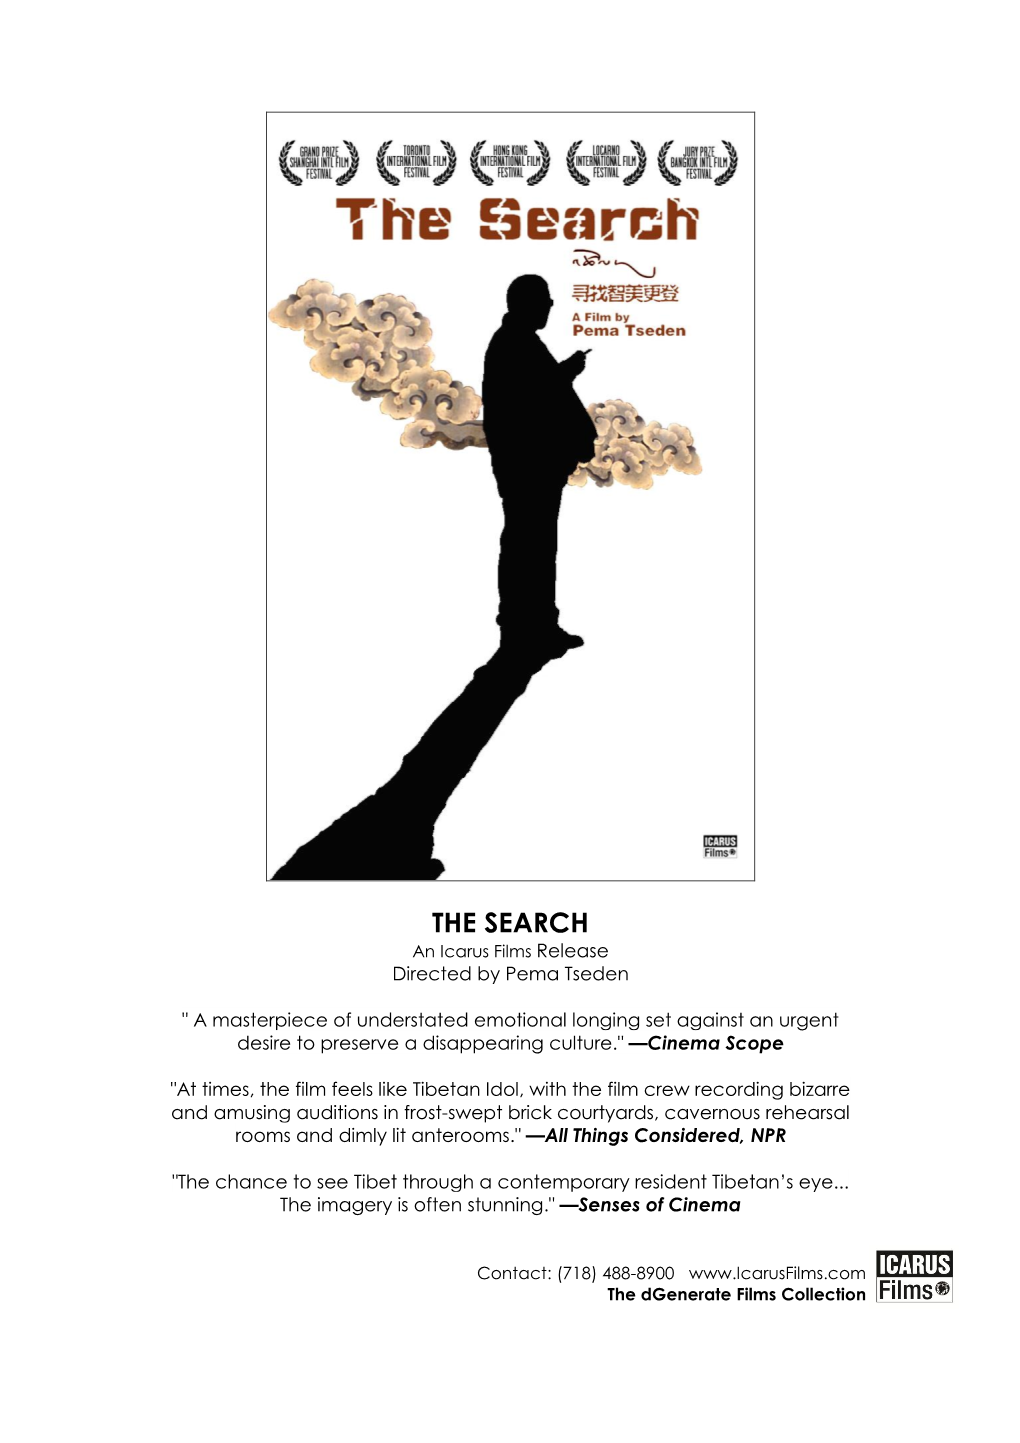 THE SEARCH an Icarus Films Release Directed by Pema Tseden